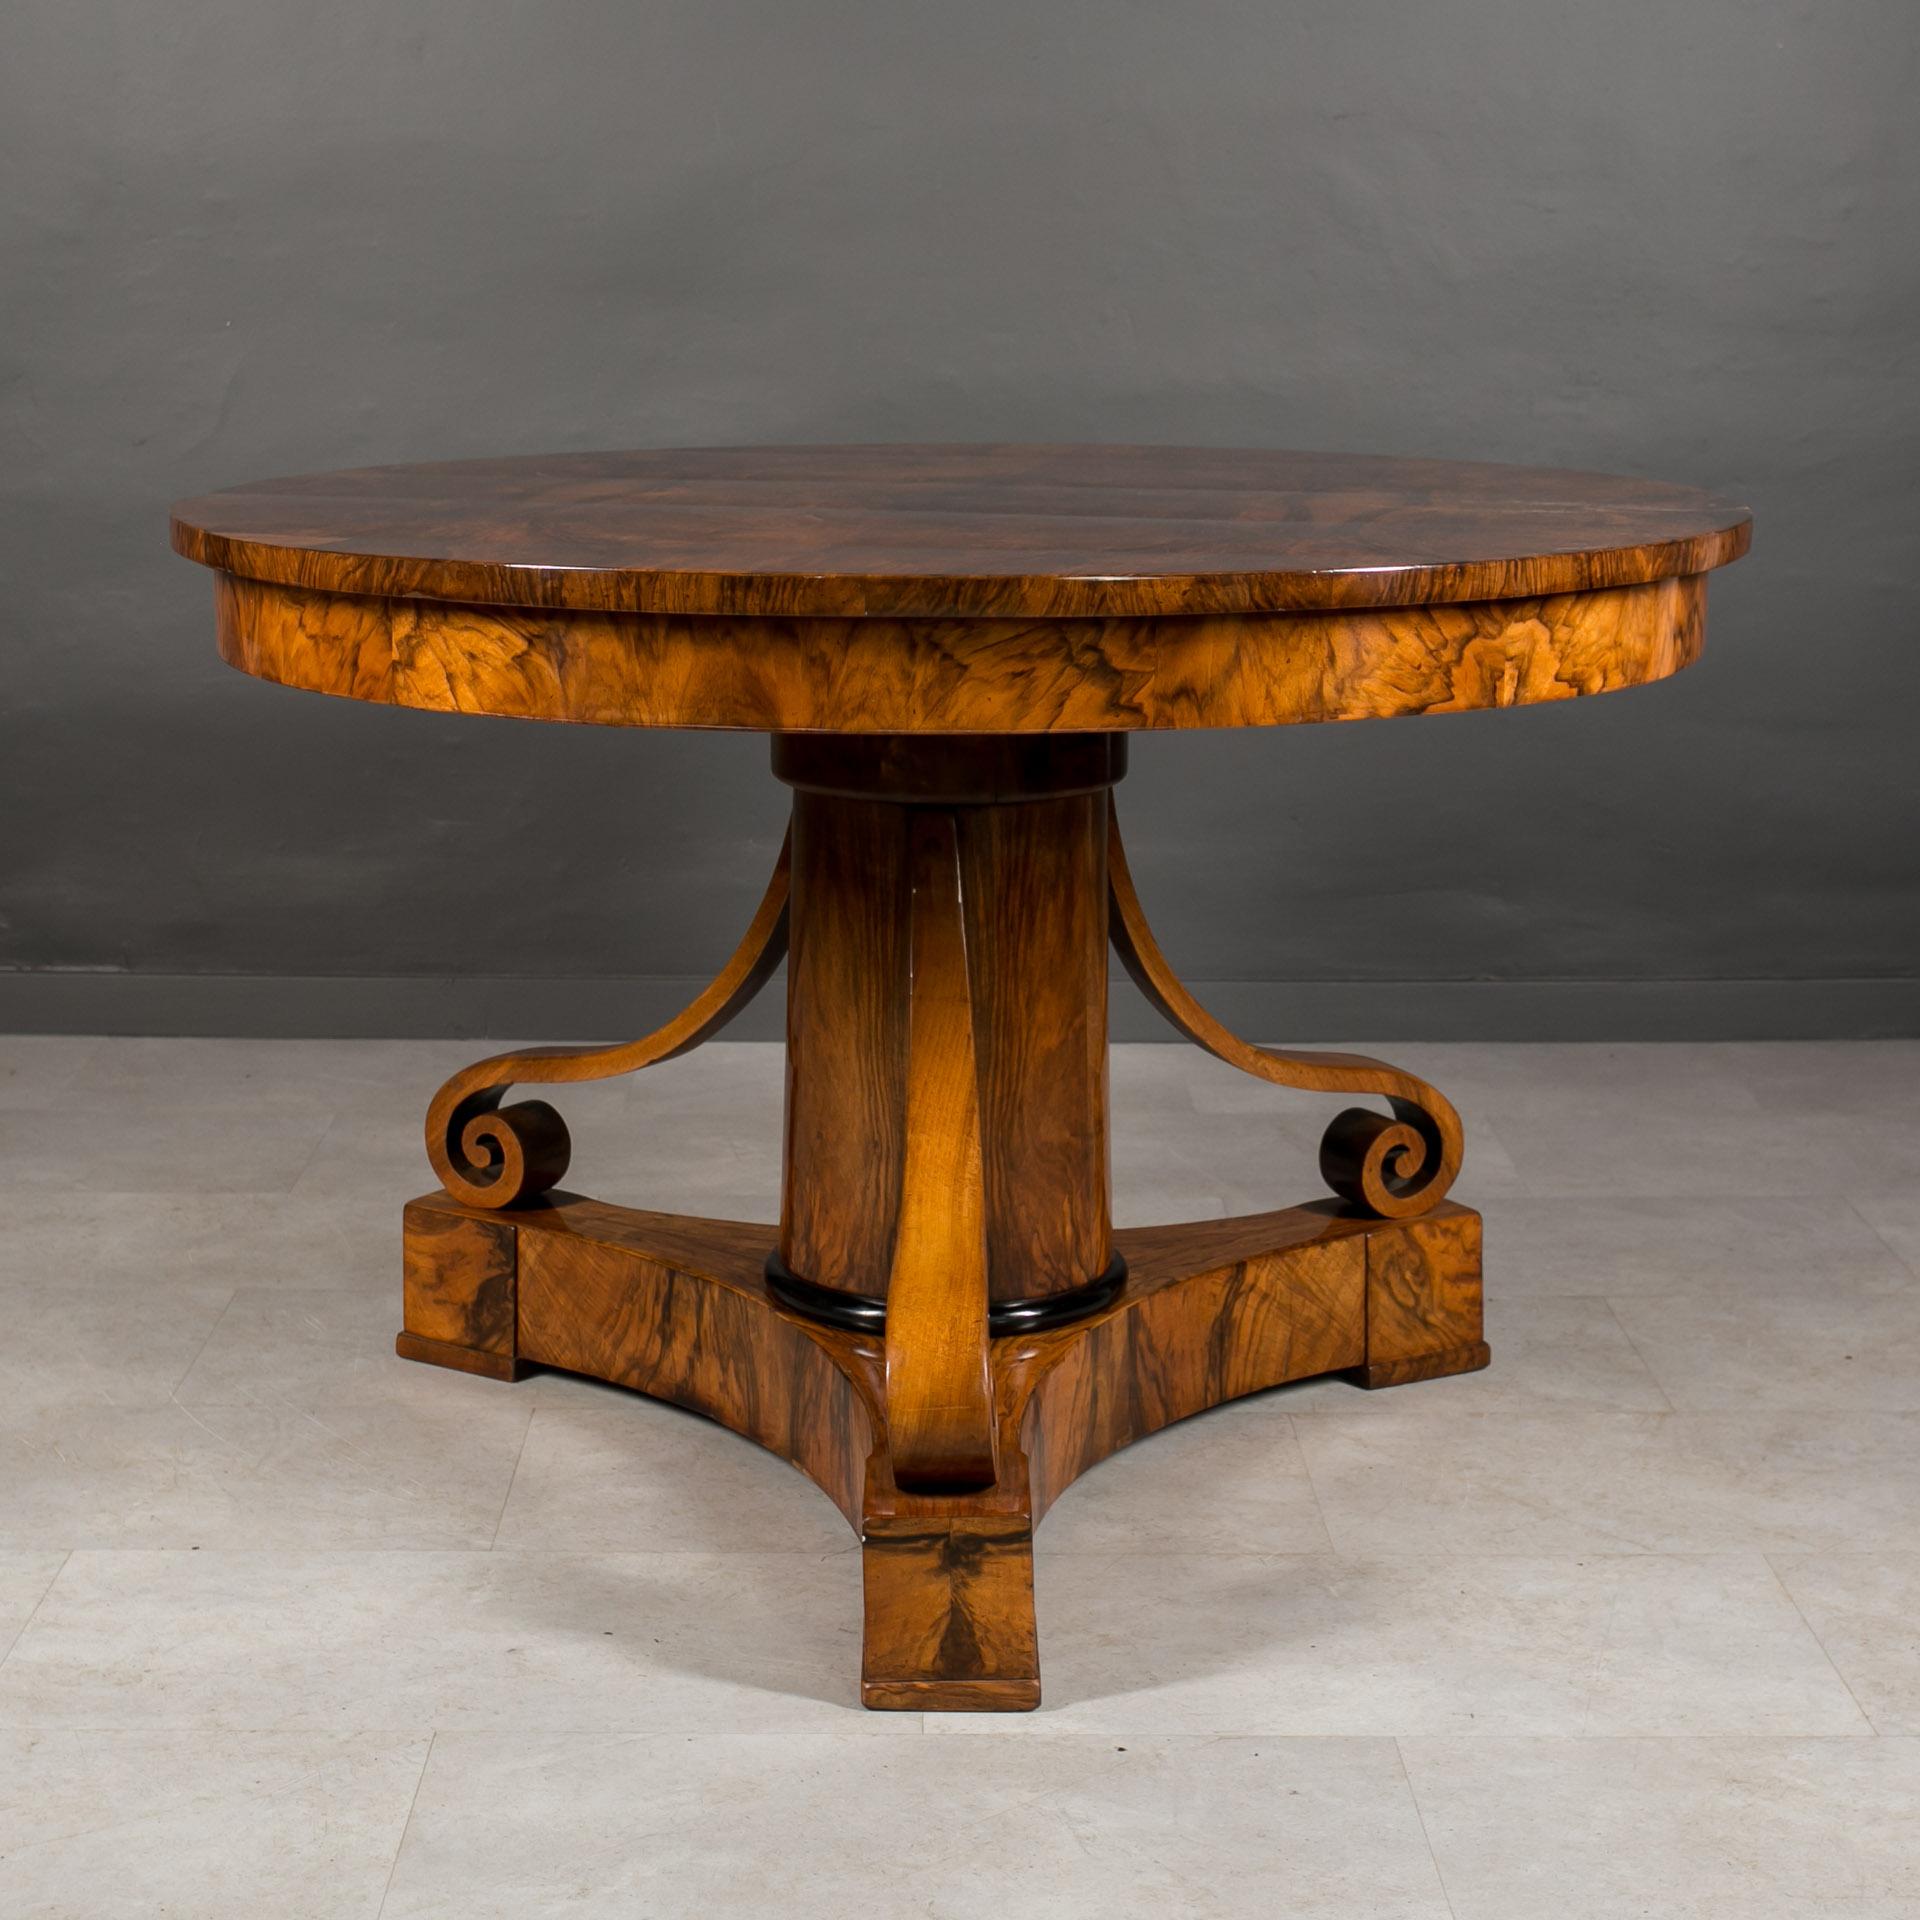 This charming Biedermeier round table, crafted in Germany circa 1830-1840, embodies timeless elegance and exceptional craftsmanship. Its stunning design features a meticulously sculpted leg adorned with ebonized accent at the base. The piece is